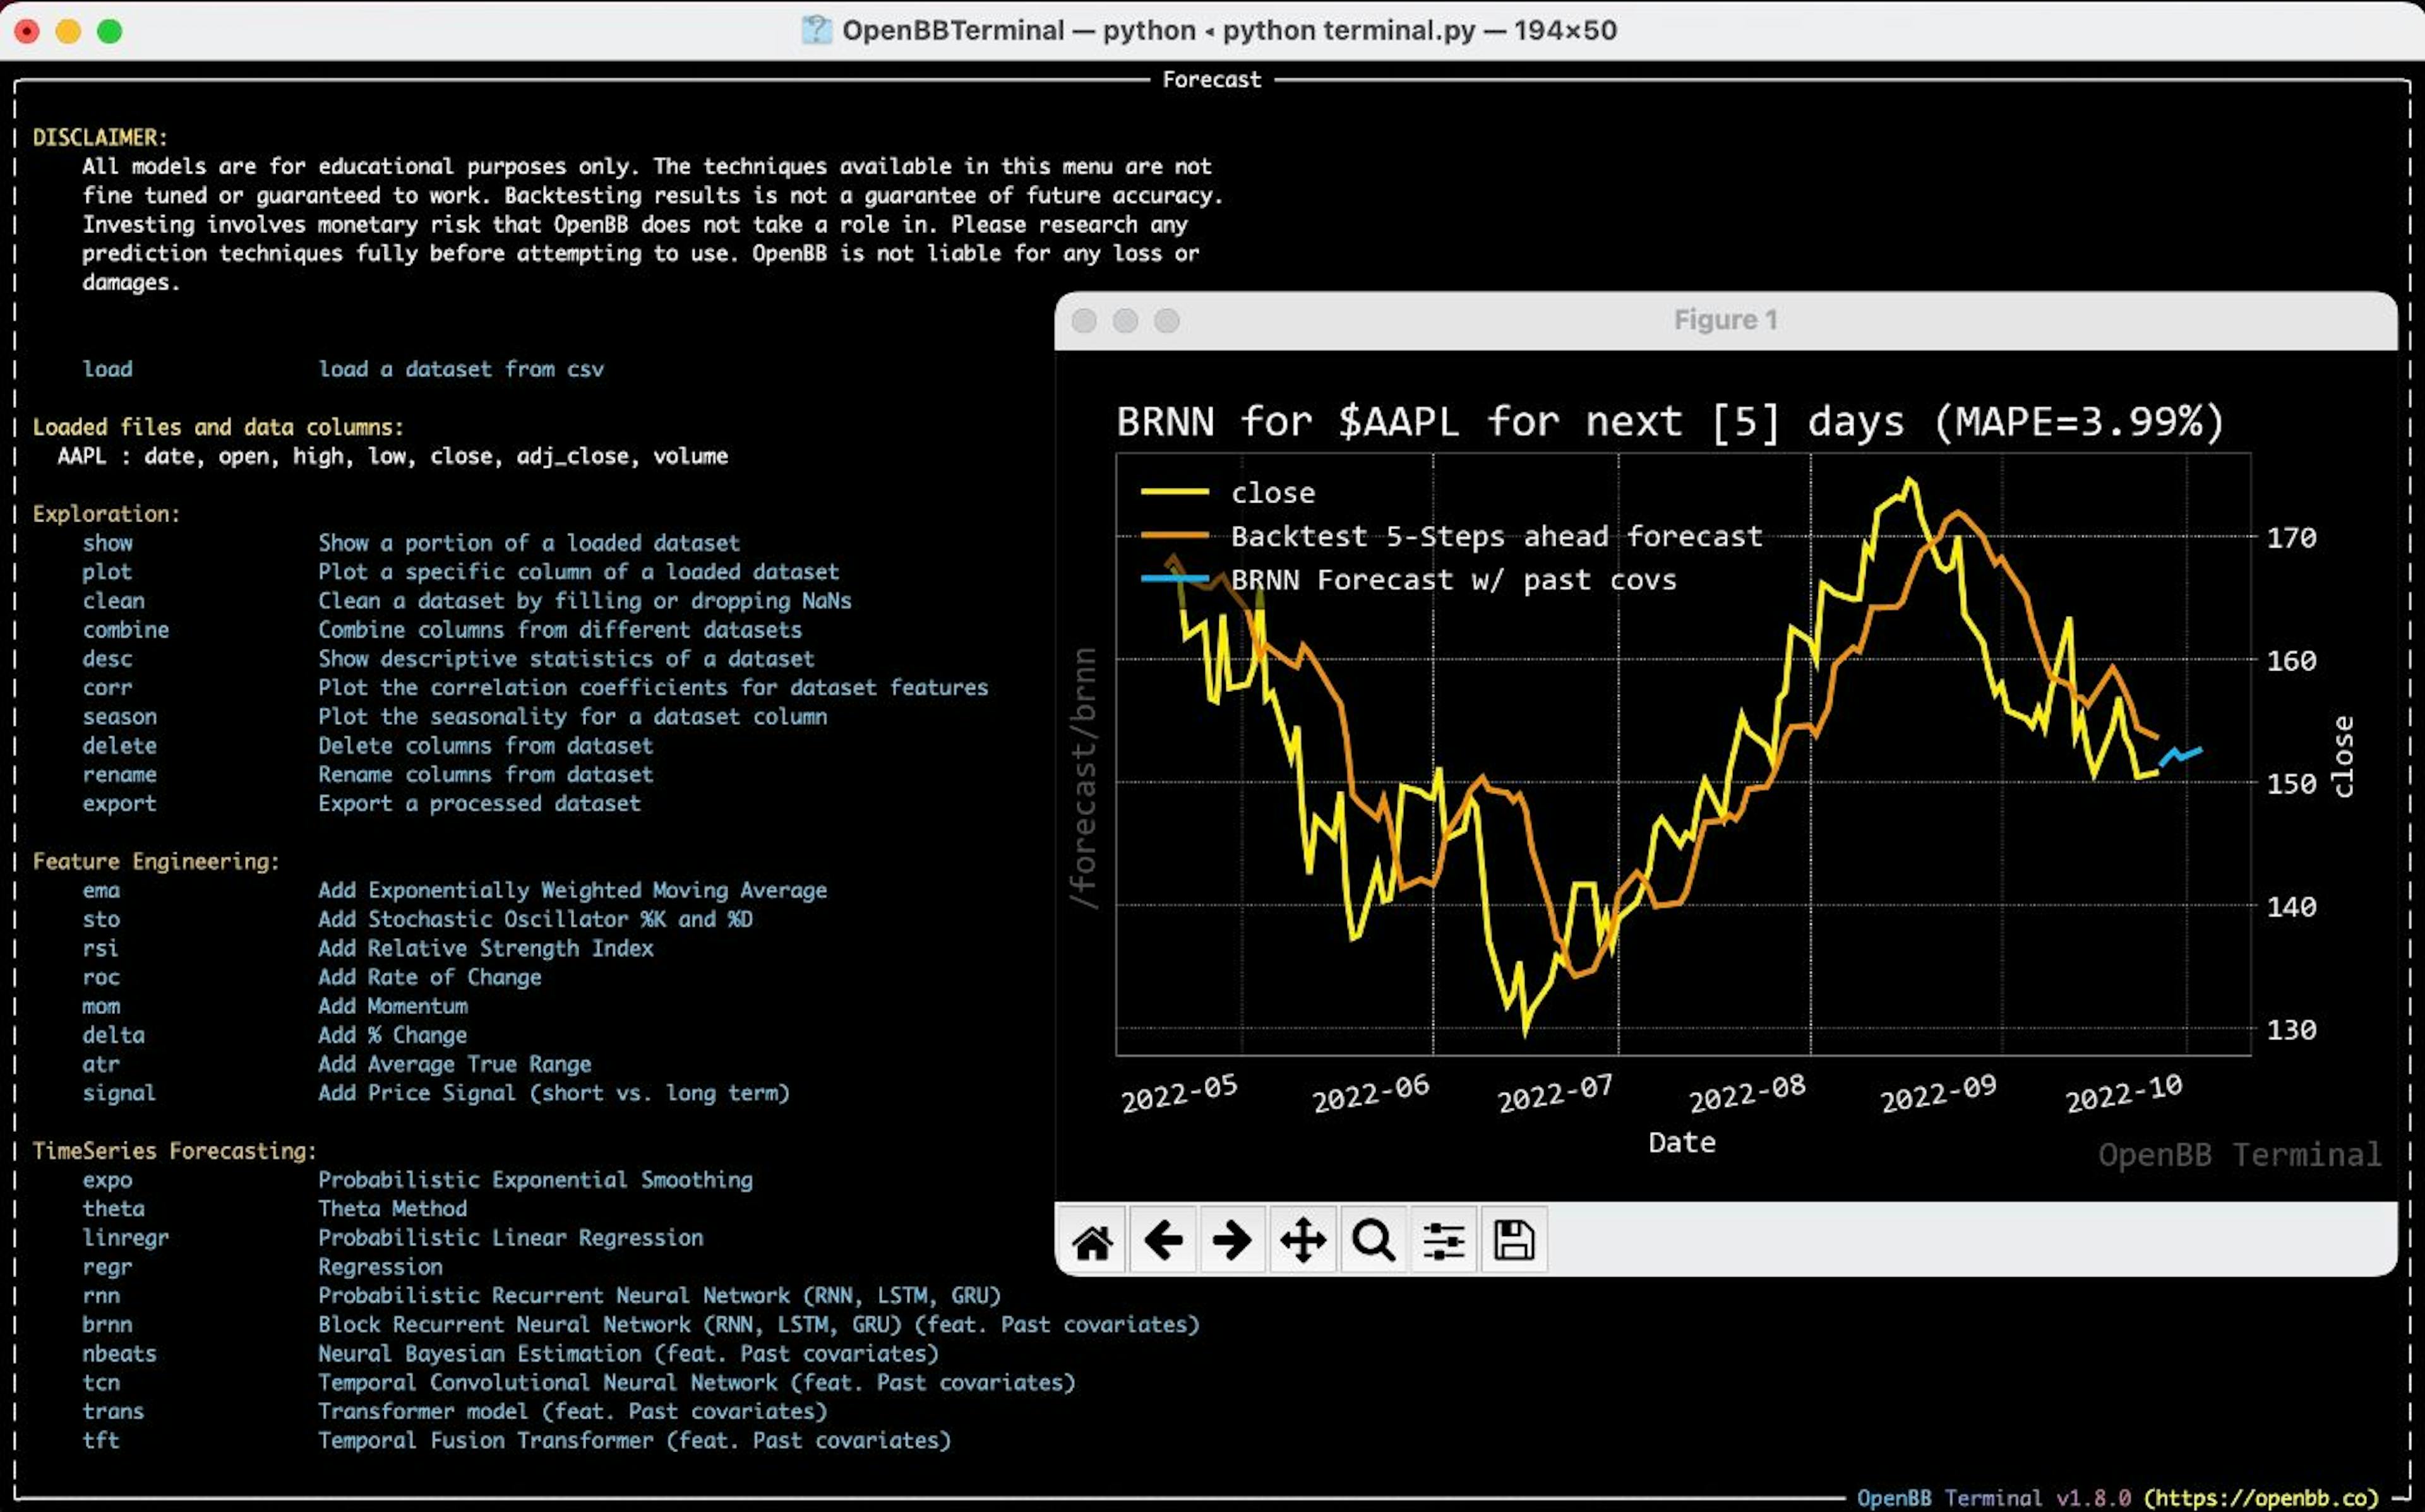 /openbb-terminal-20-is-more-than-an-alternative-for-bloomberg-terminal feature image